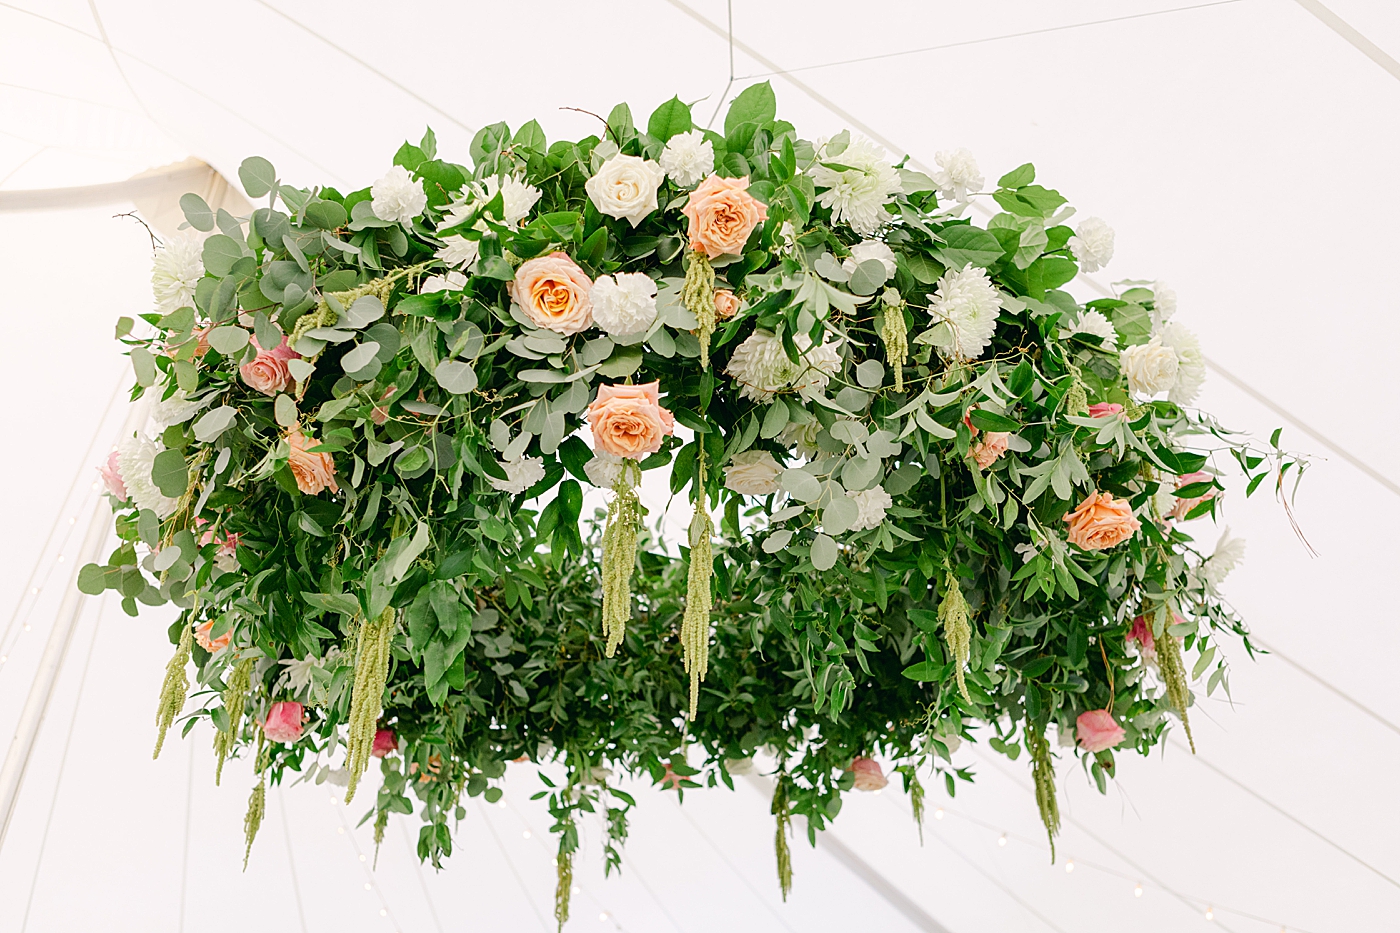 Wedding flower installation | Image by Hope Helmuth Photography